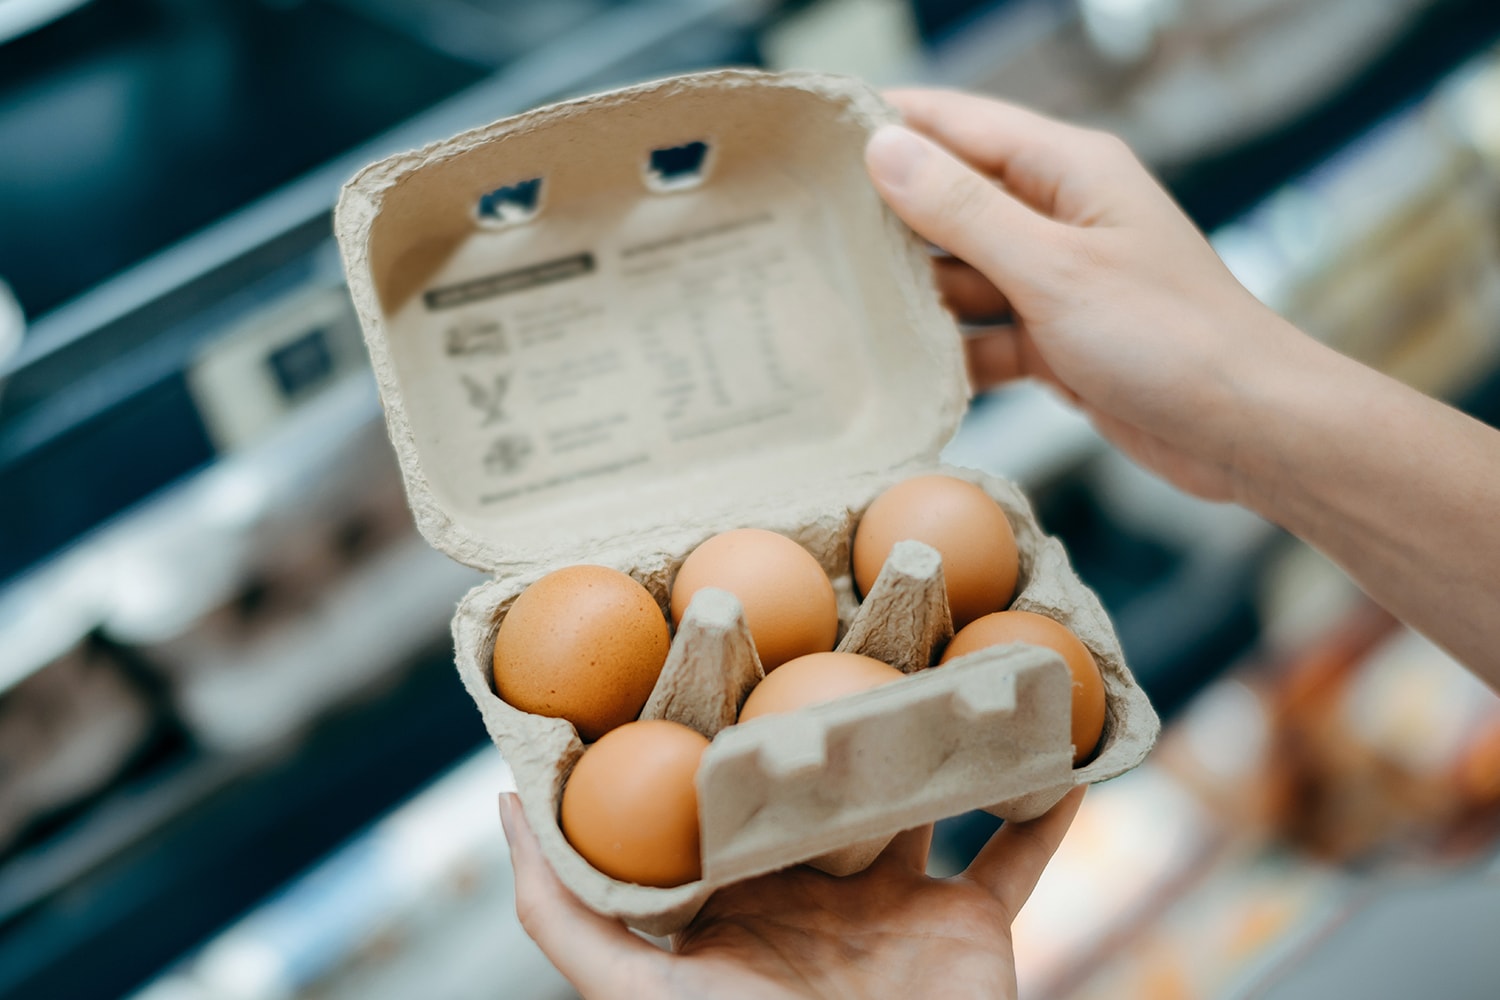 Increasing Prices Made Biggest United States Egg Producers 718 Percent Profit Info Cal-Maine Foods